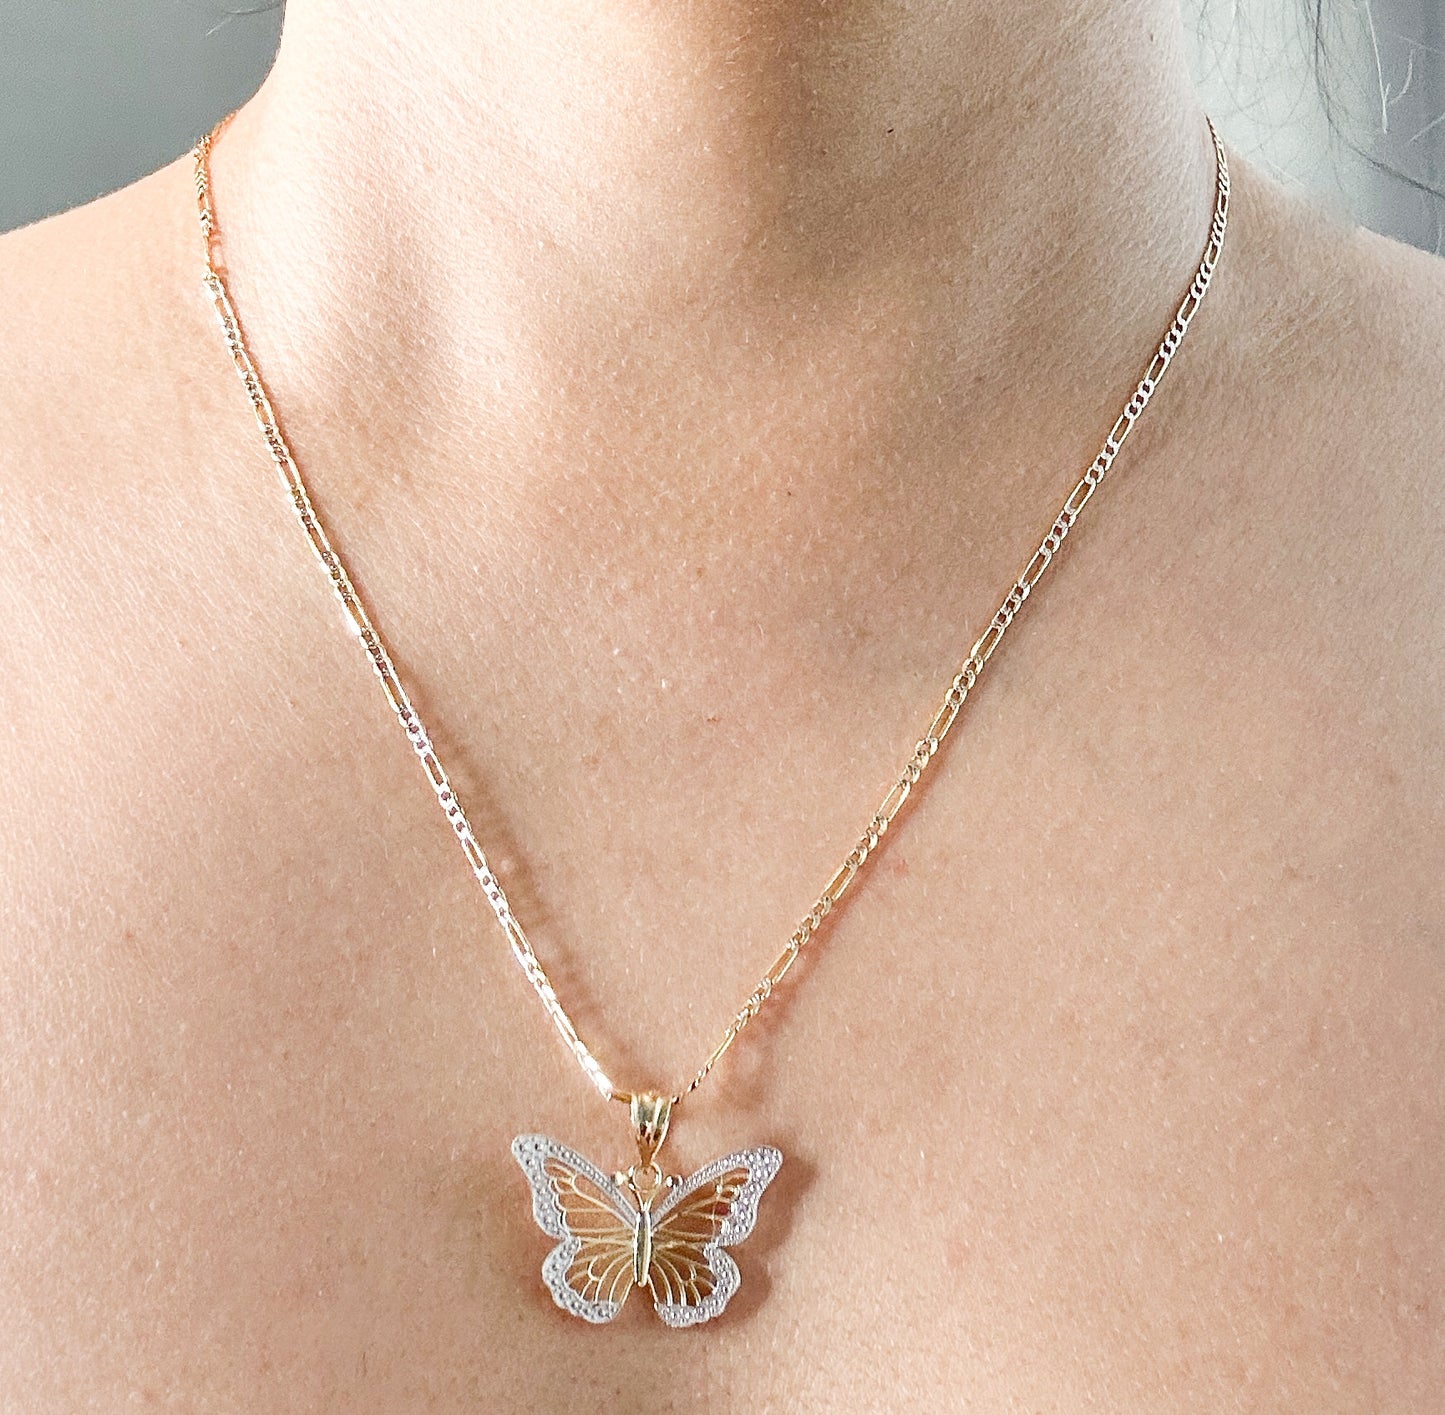 Butterfly Pendant with Figaro Chain Necklace